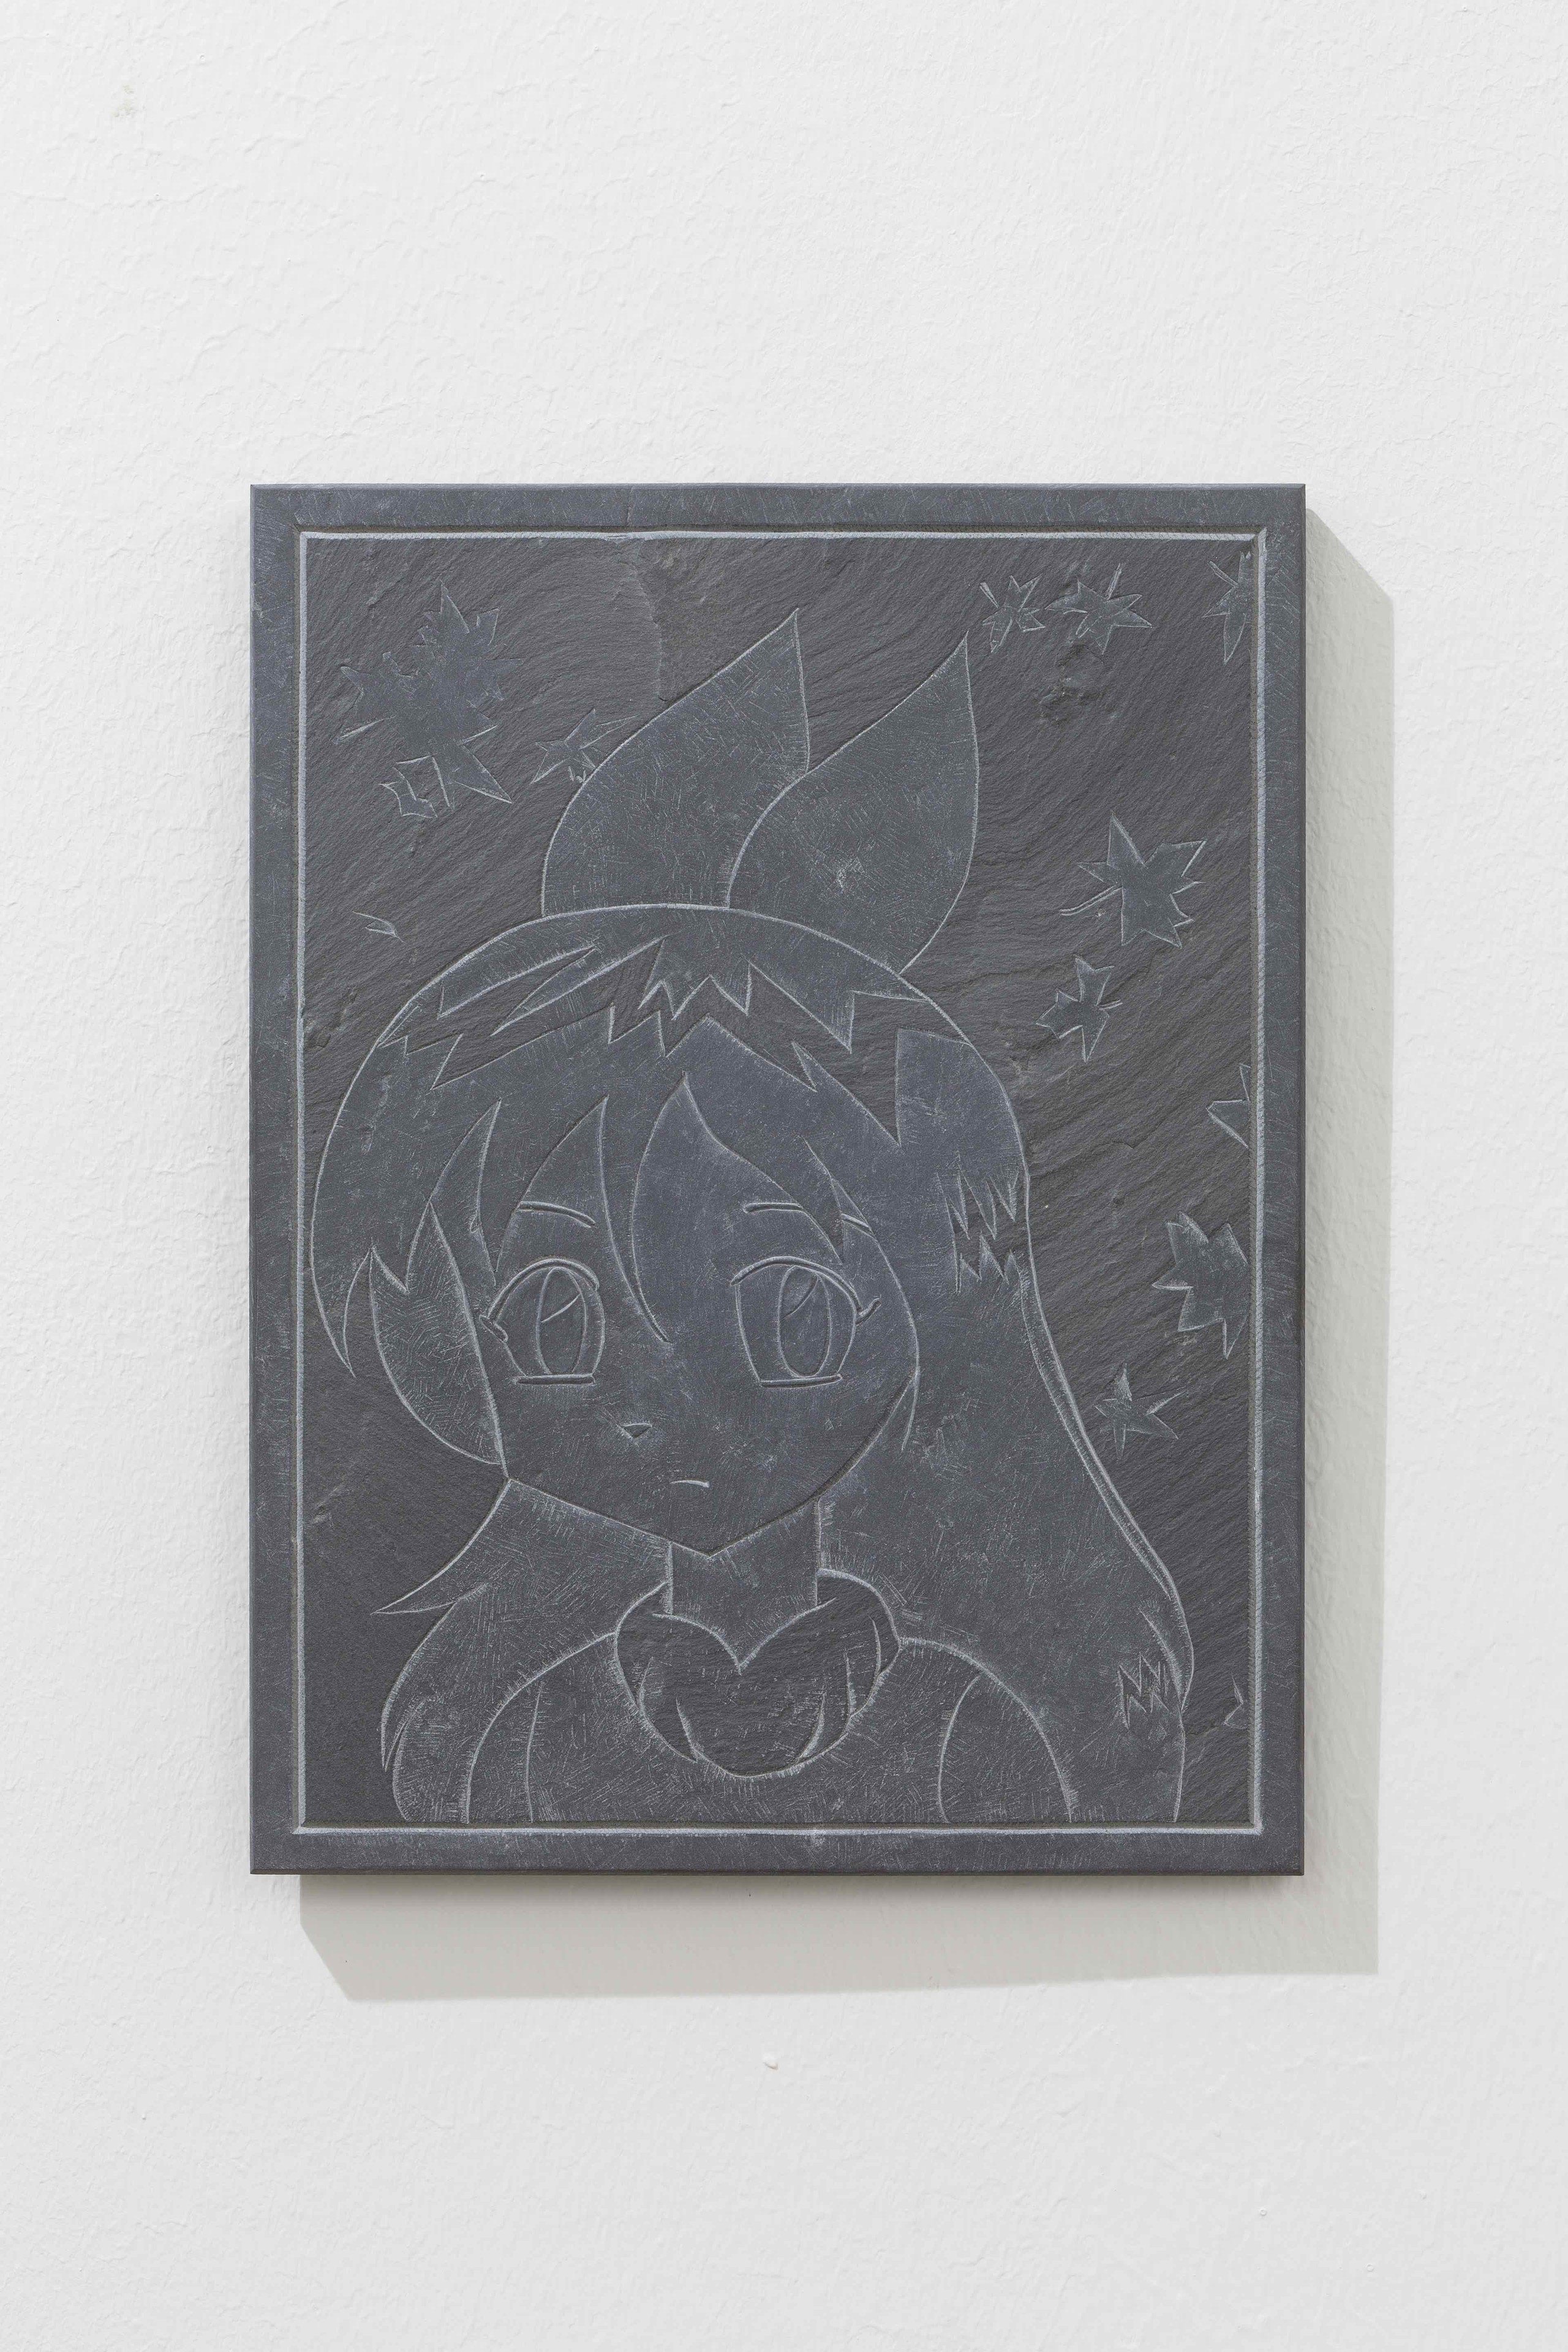 Bunny Rogers, Untitled, 2015, Carved slate stone, 28 x 21 x 0.6 cm/ 11 x 8.25 x 0.25 inches